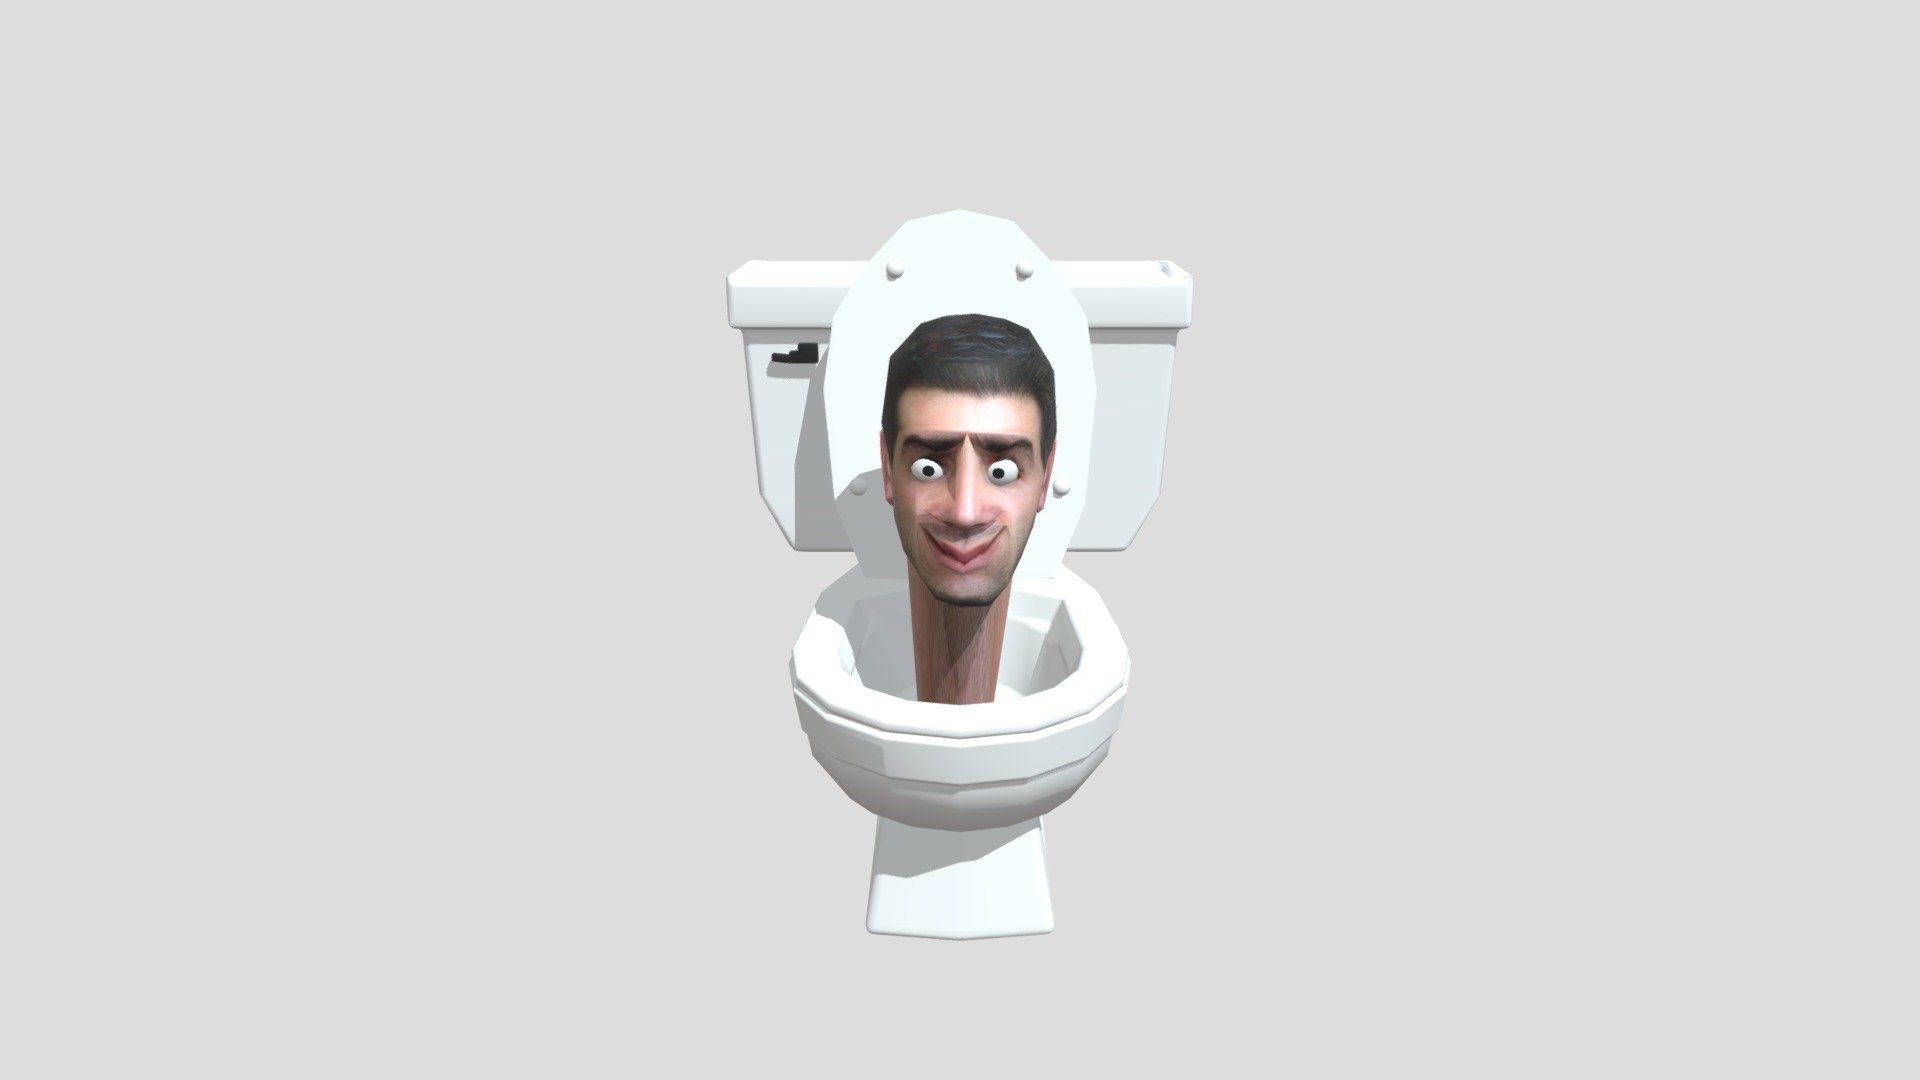 I created a 3D model of the Skibidi toilet, which is a horror and fun character. The face inside the toilet can be changed.

Download Link: https://www.cgtrader com/3d-models/character/sci-fi-character/skibidi-toilet-2

You can download it from the link by putting a dot in front of com !(.com)! - Skibidi Toilet 2 - 3D model by snisa 3d model